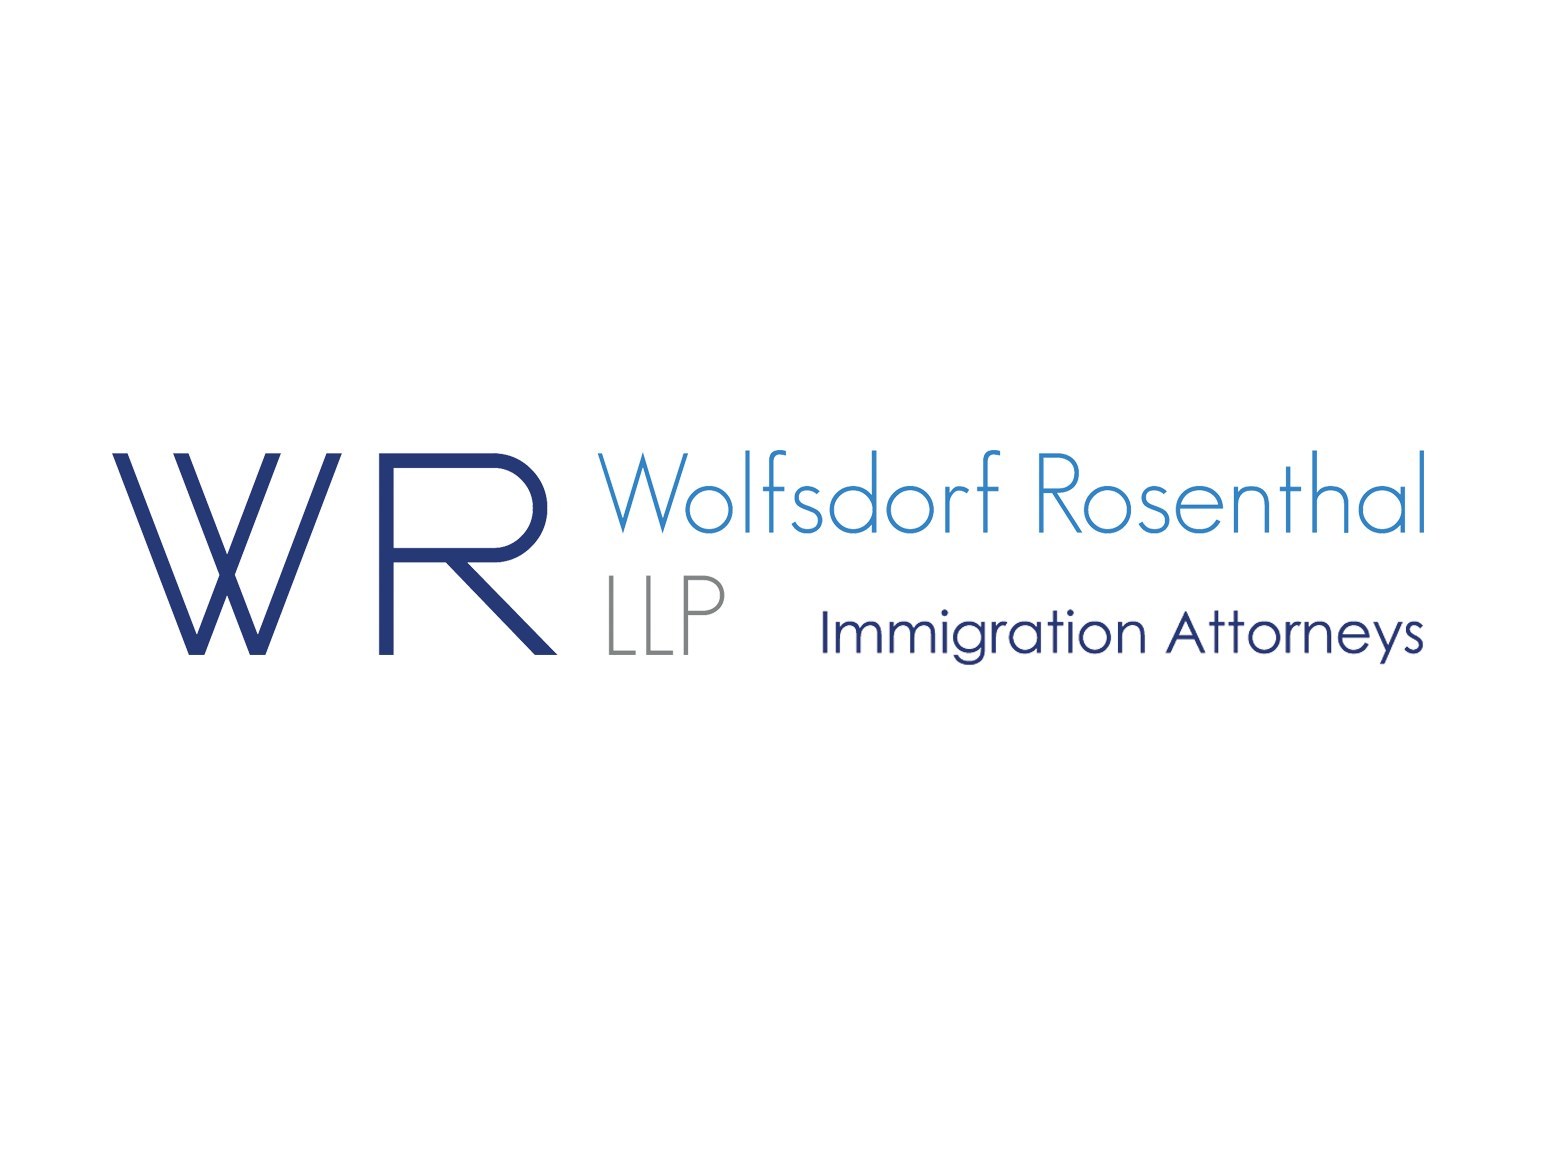 Top-Rated Immigration Law Firm Wolfsdorf Rosenthal LLP Expands into the Bay Area